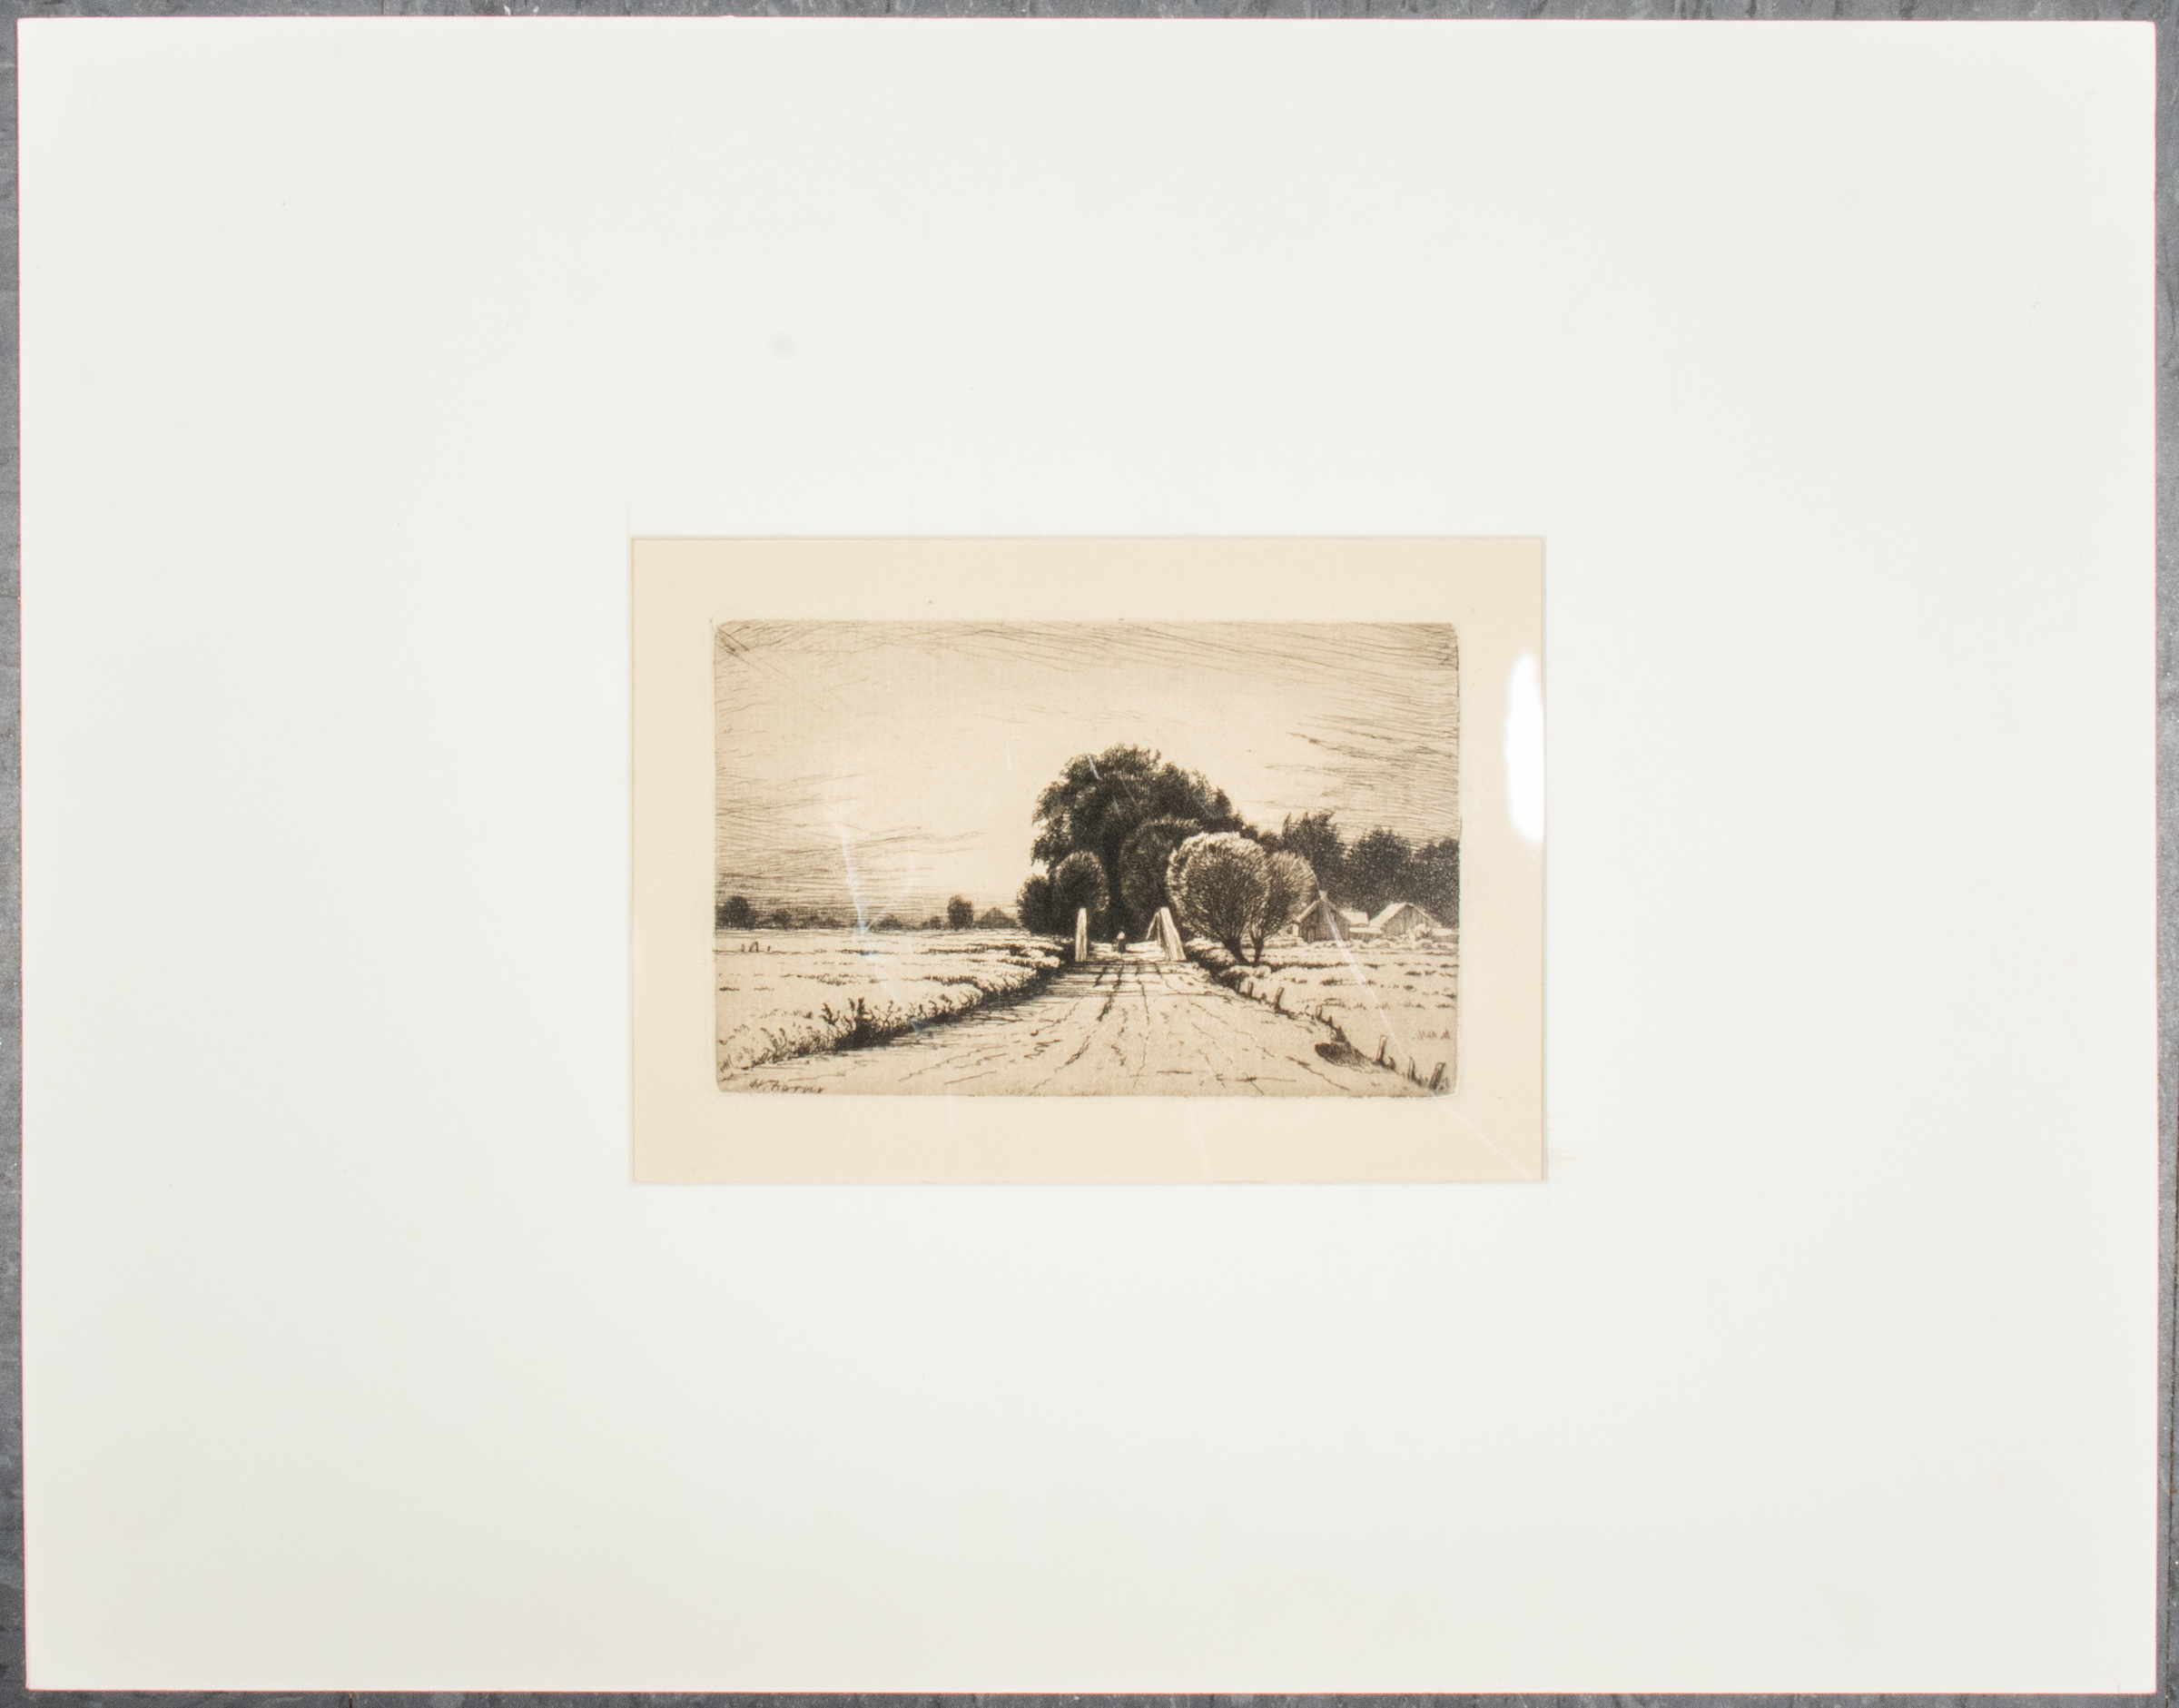 HENRY FARRER "SUNSET" ETCHING ON